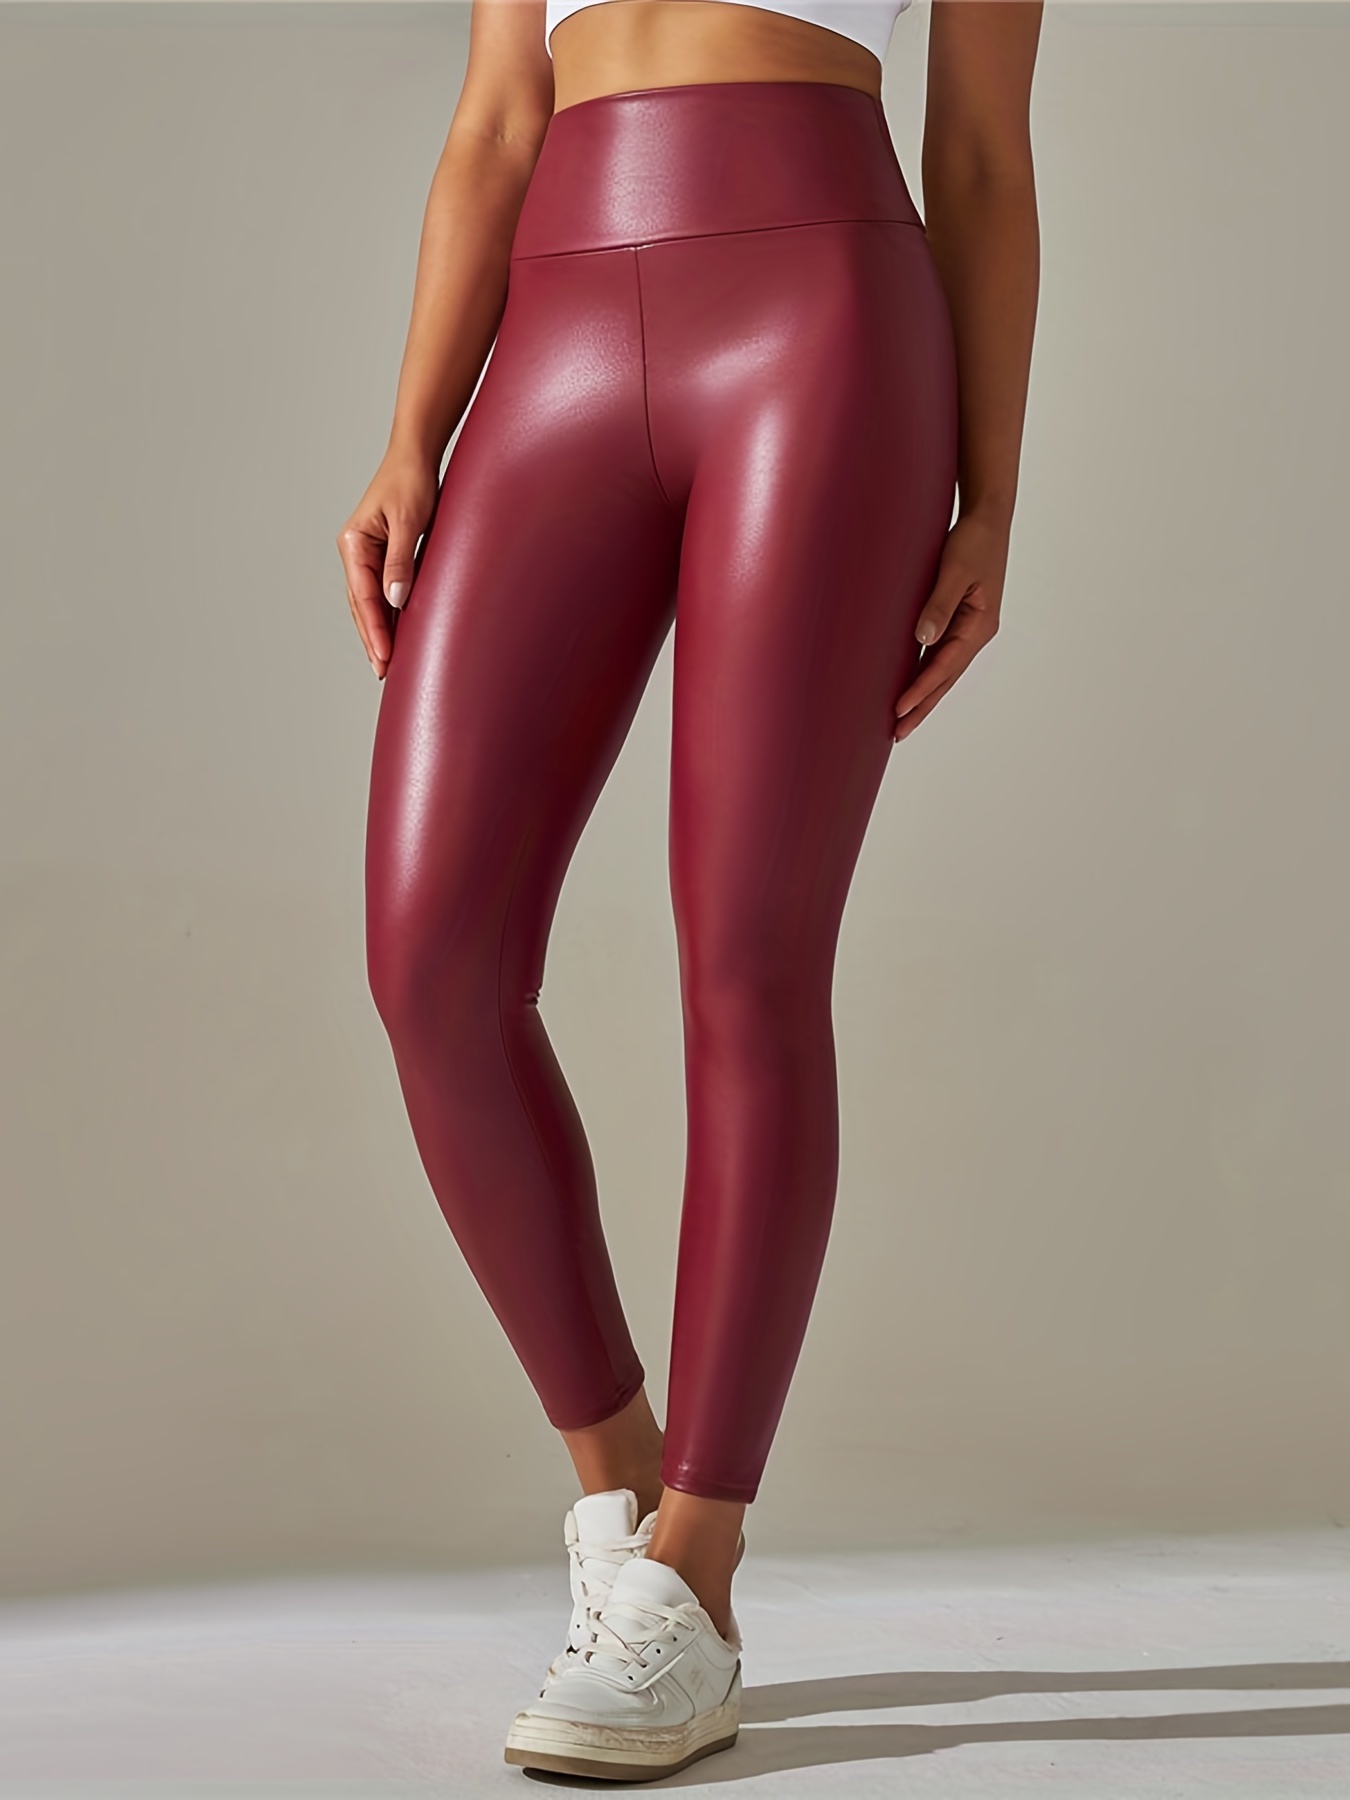 Women Sexy Leggings PU Leather Leggings Pants Faux Leather Solid